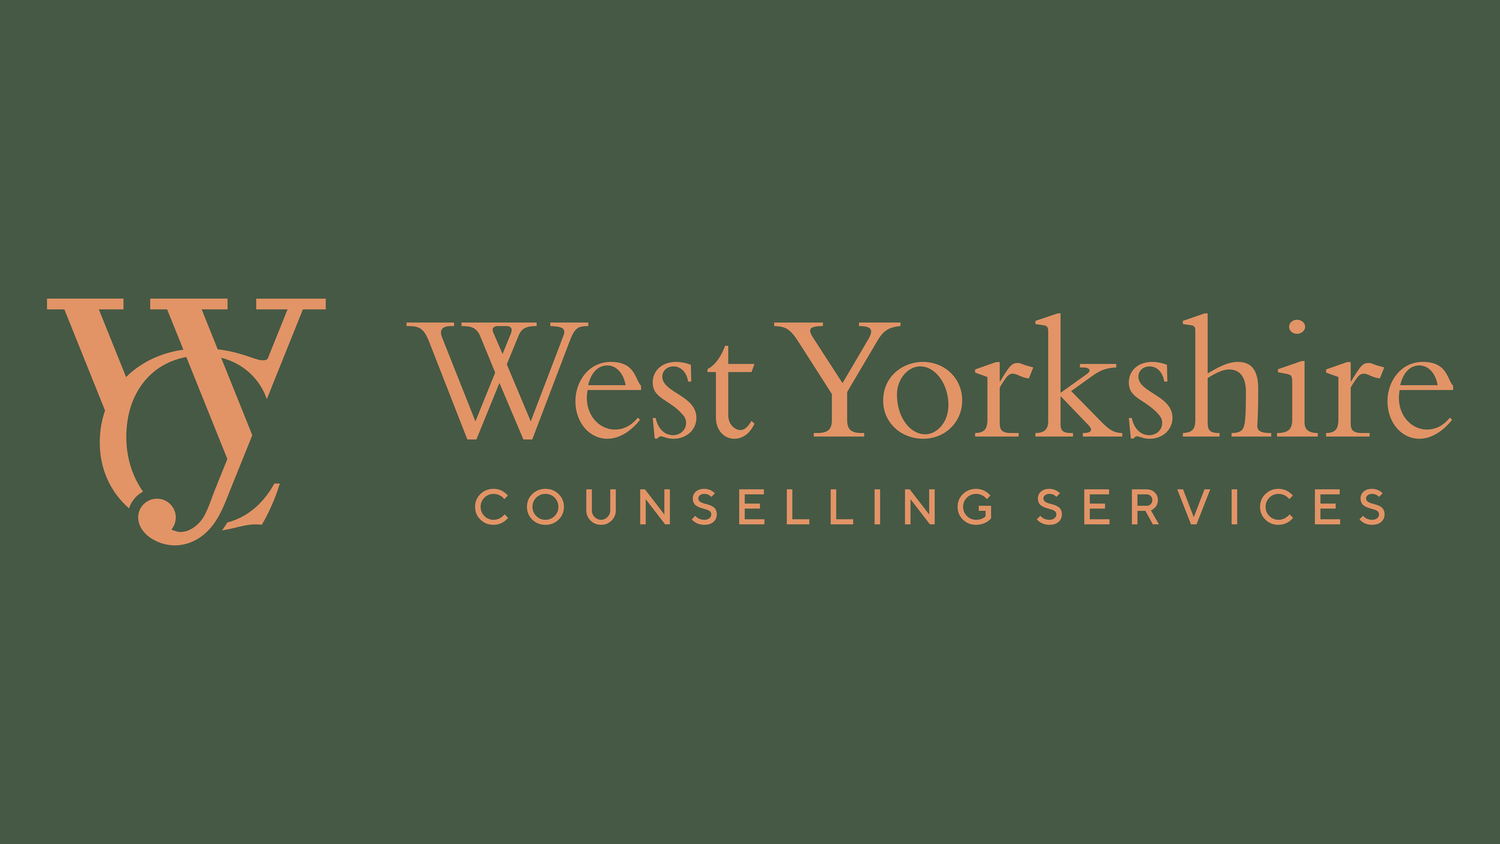 West Yorkshire Counselling Services.